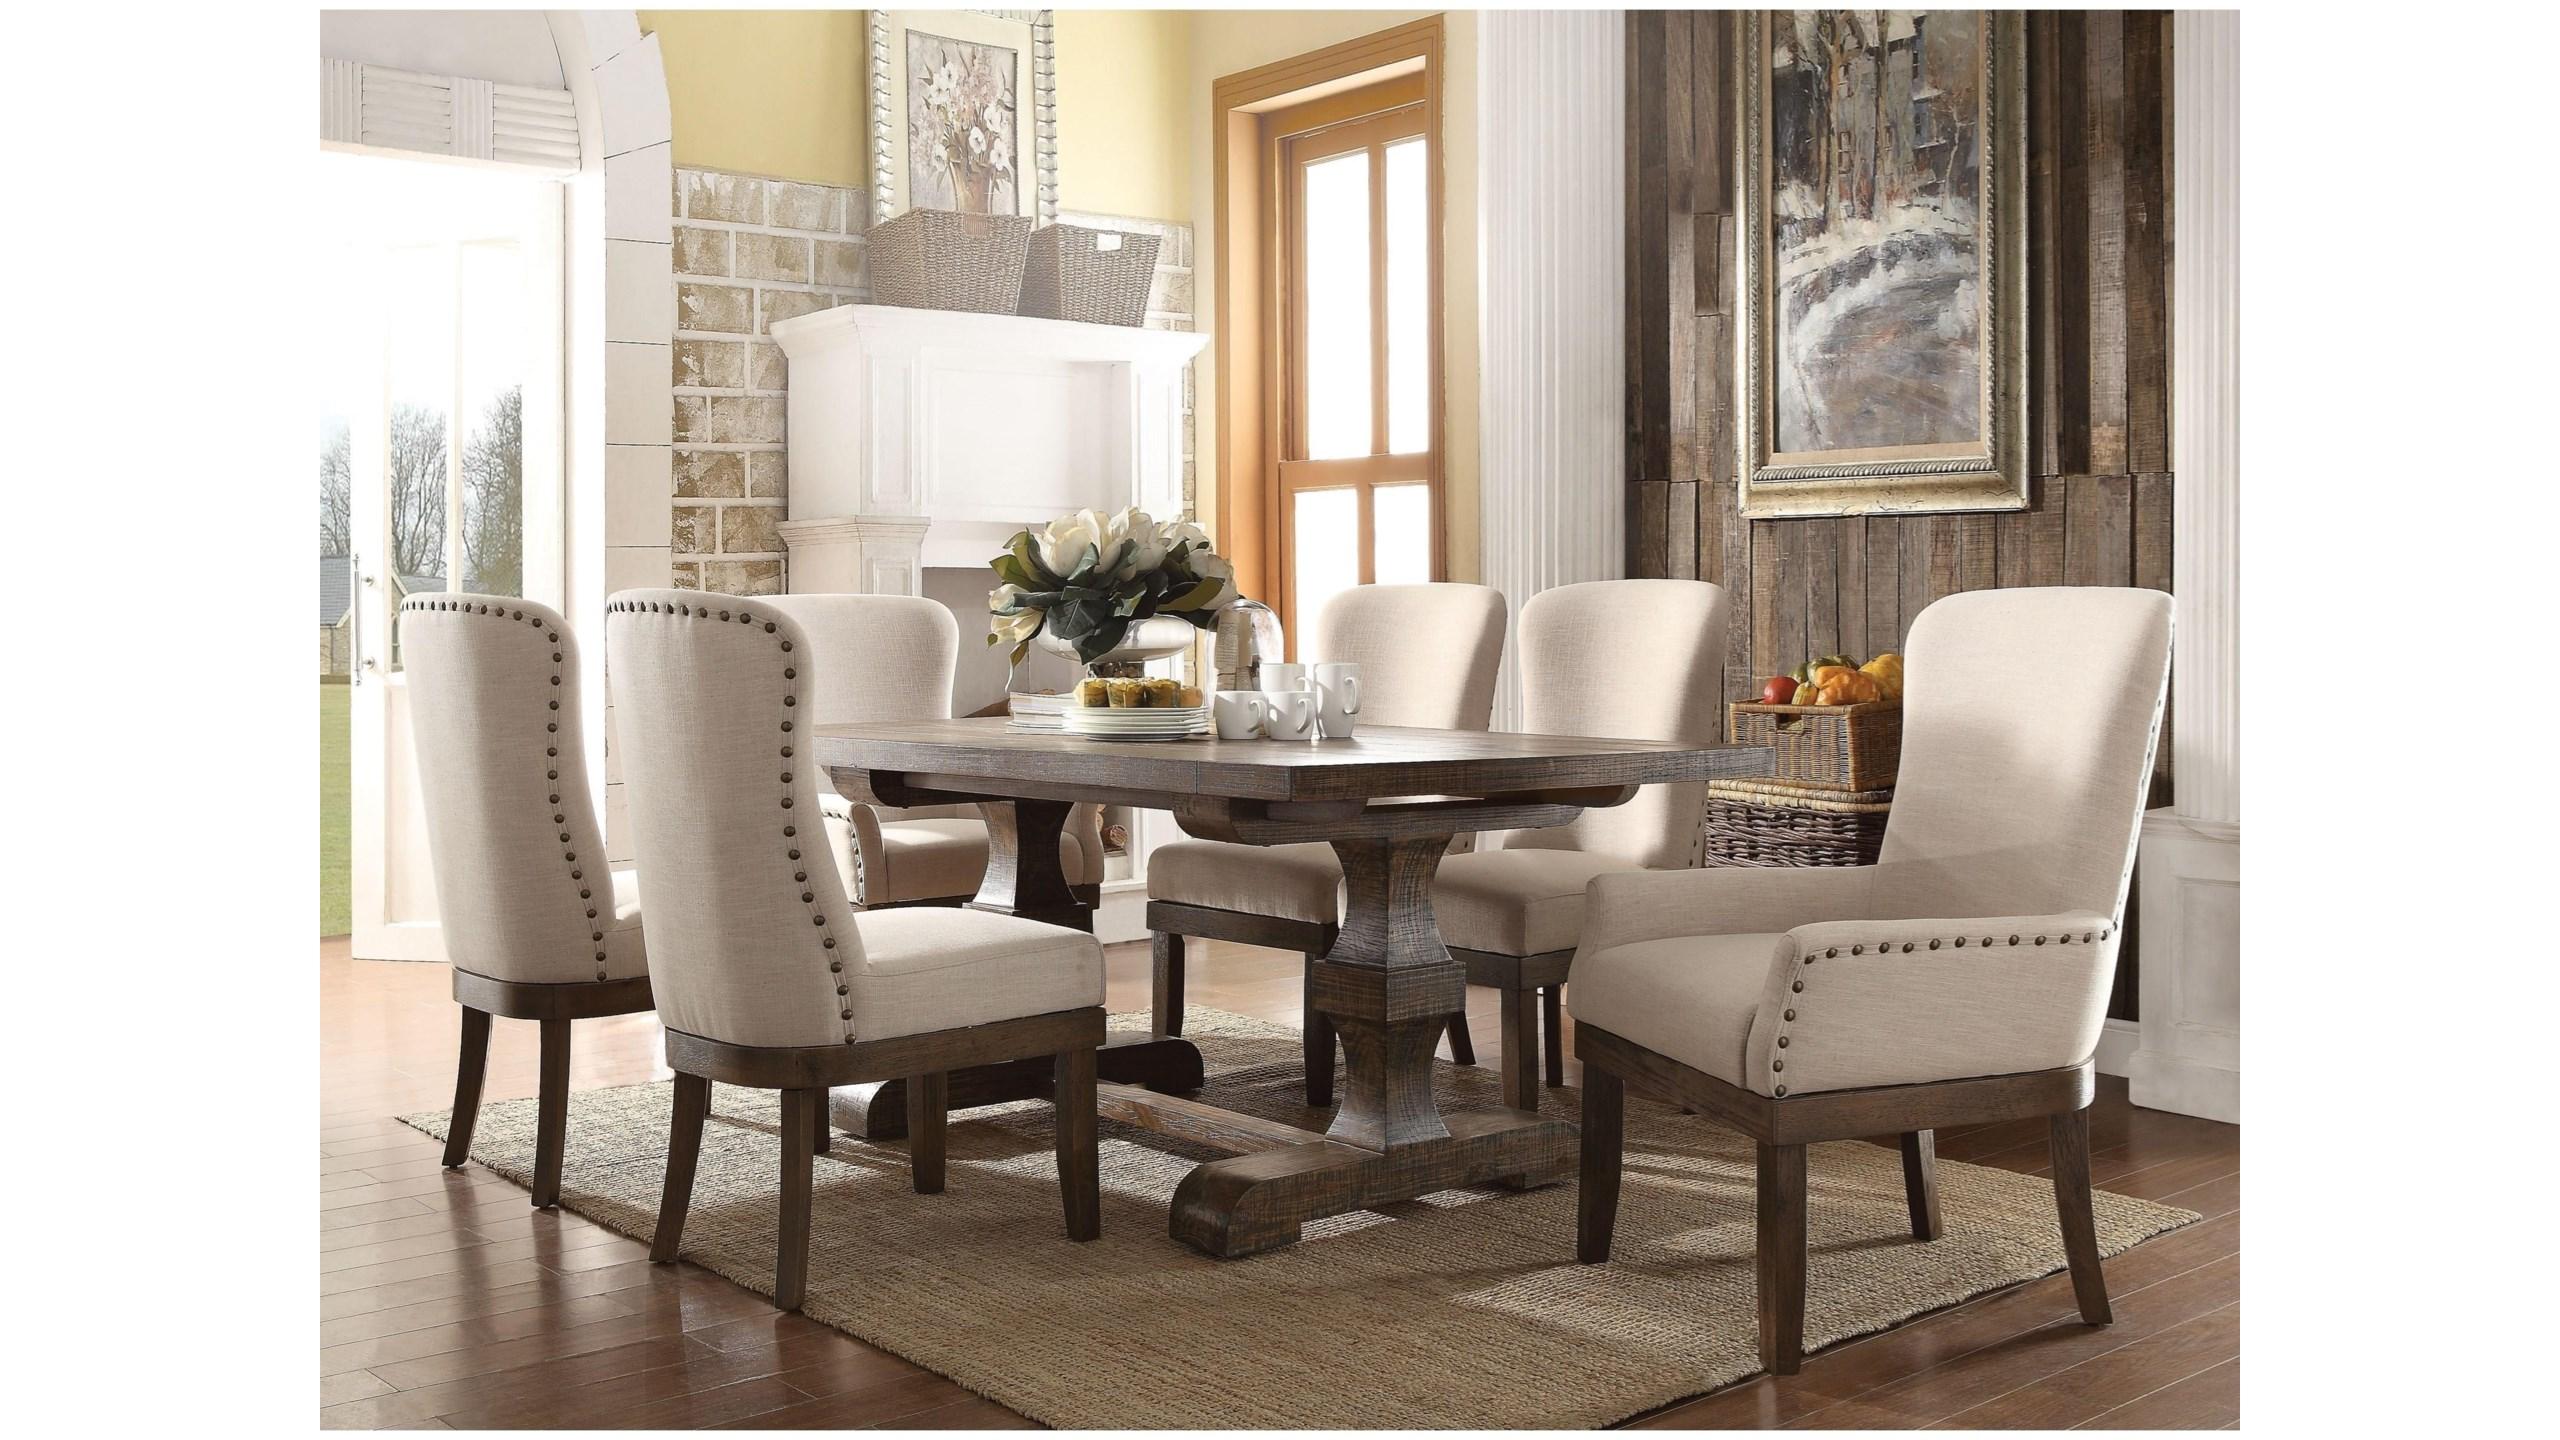 Traditional, Rustic Dining Room Set Landon 60737-8pcs in Brown Linen